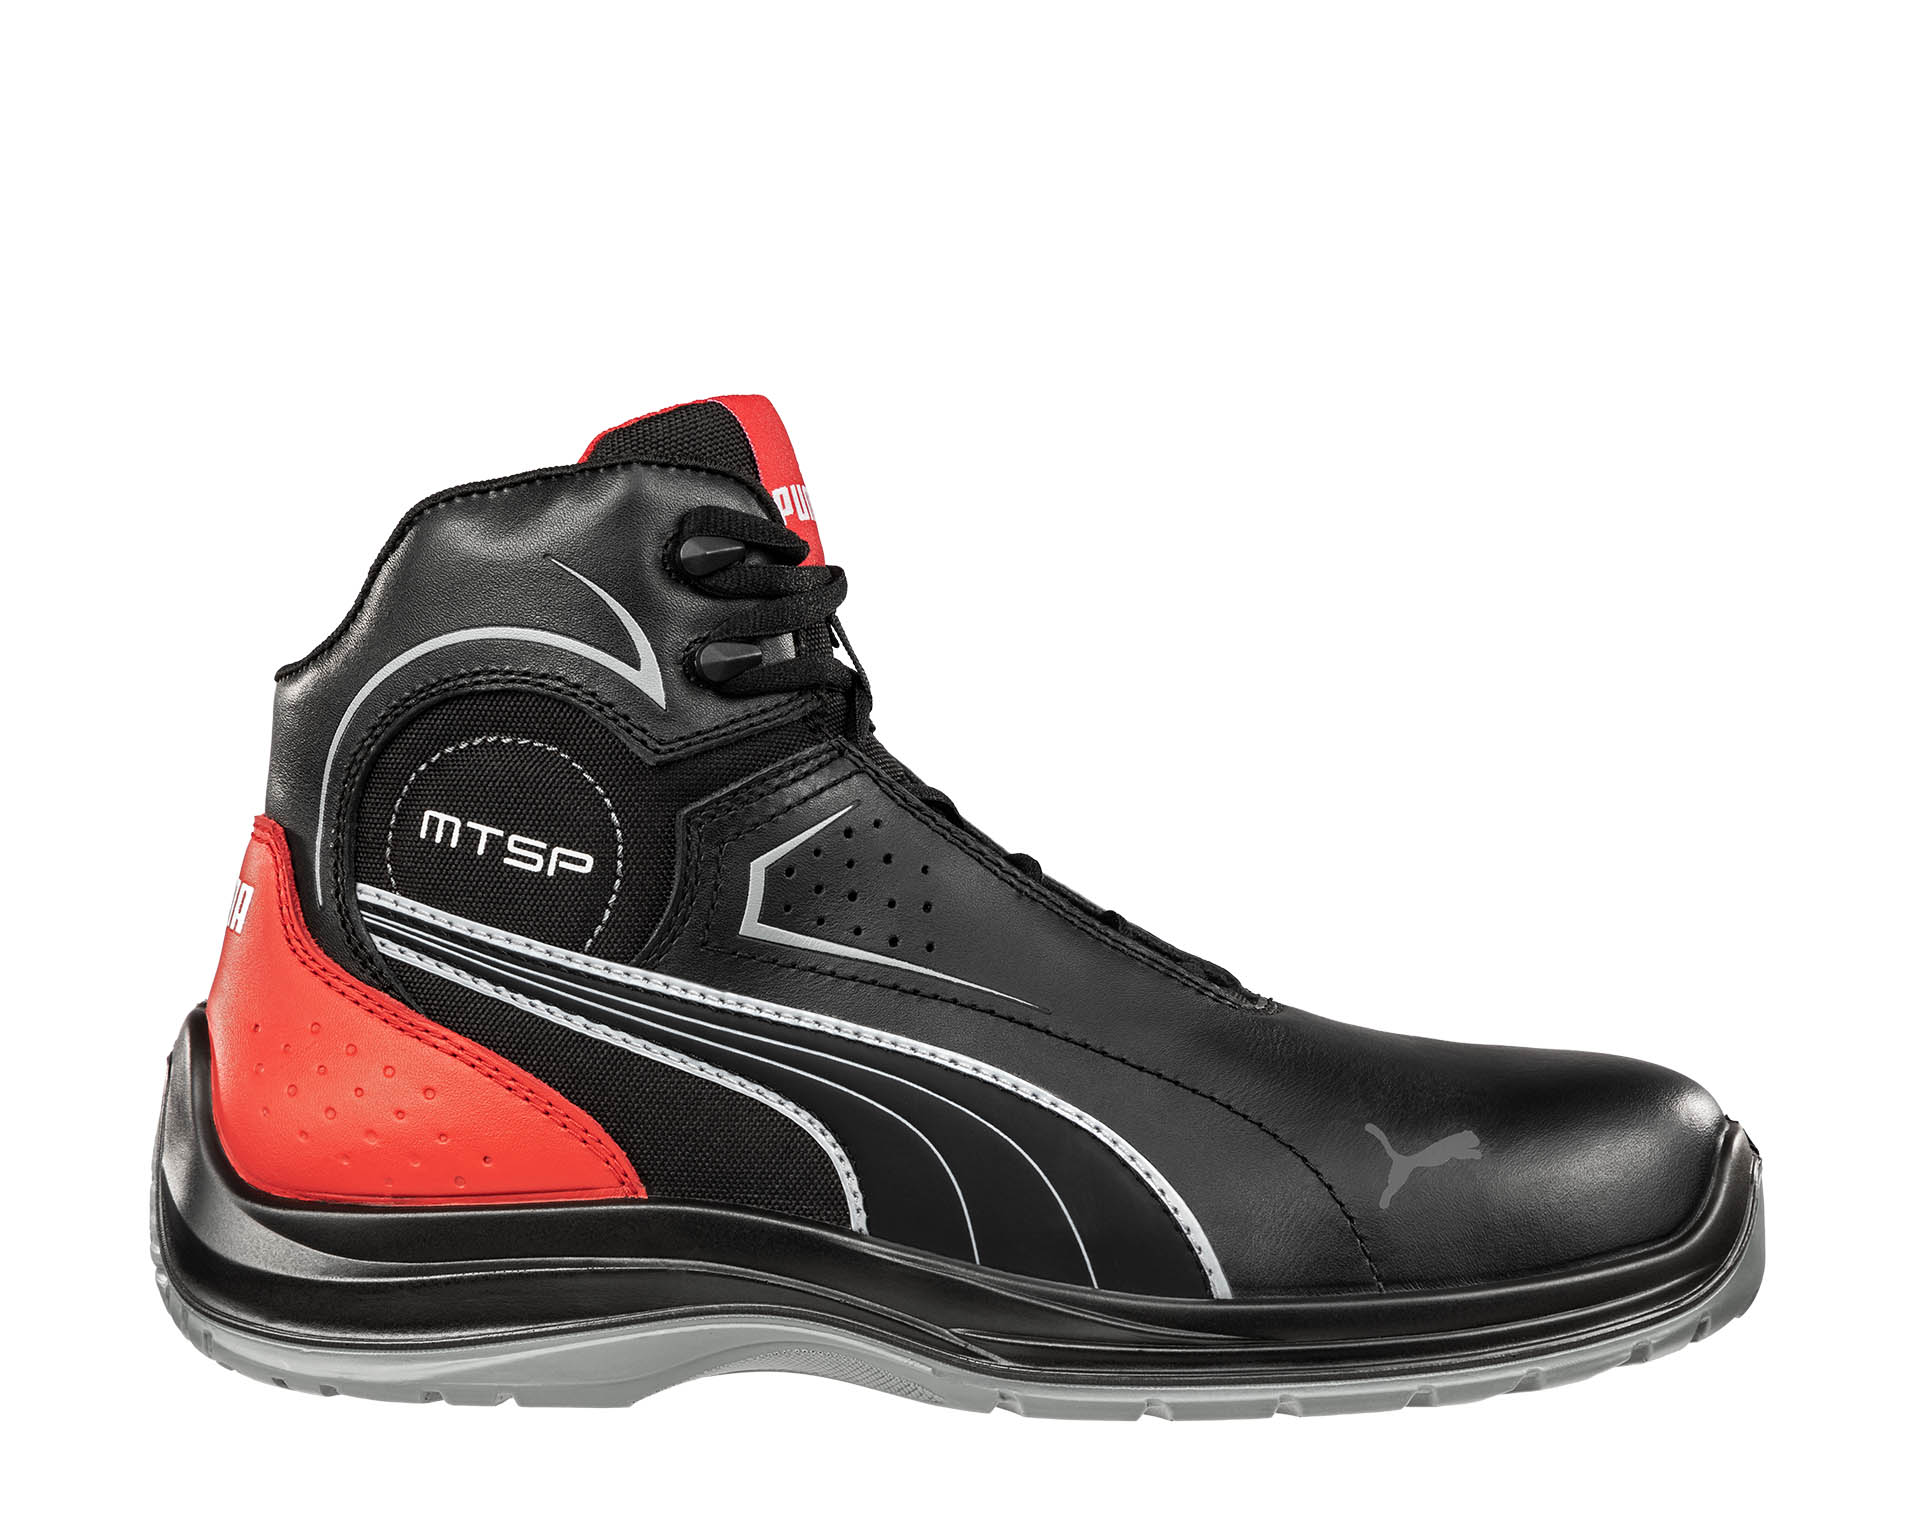 ASTM | Puma USA work shoes SR MID|PUMA EH TOURING Safety BLACK SAFETY